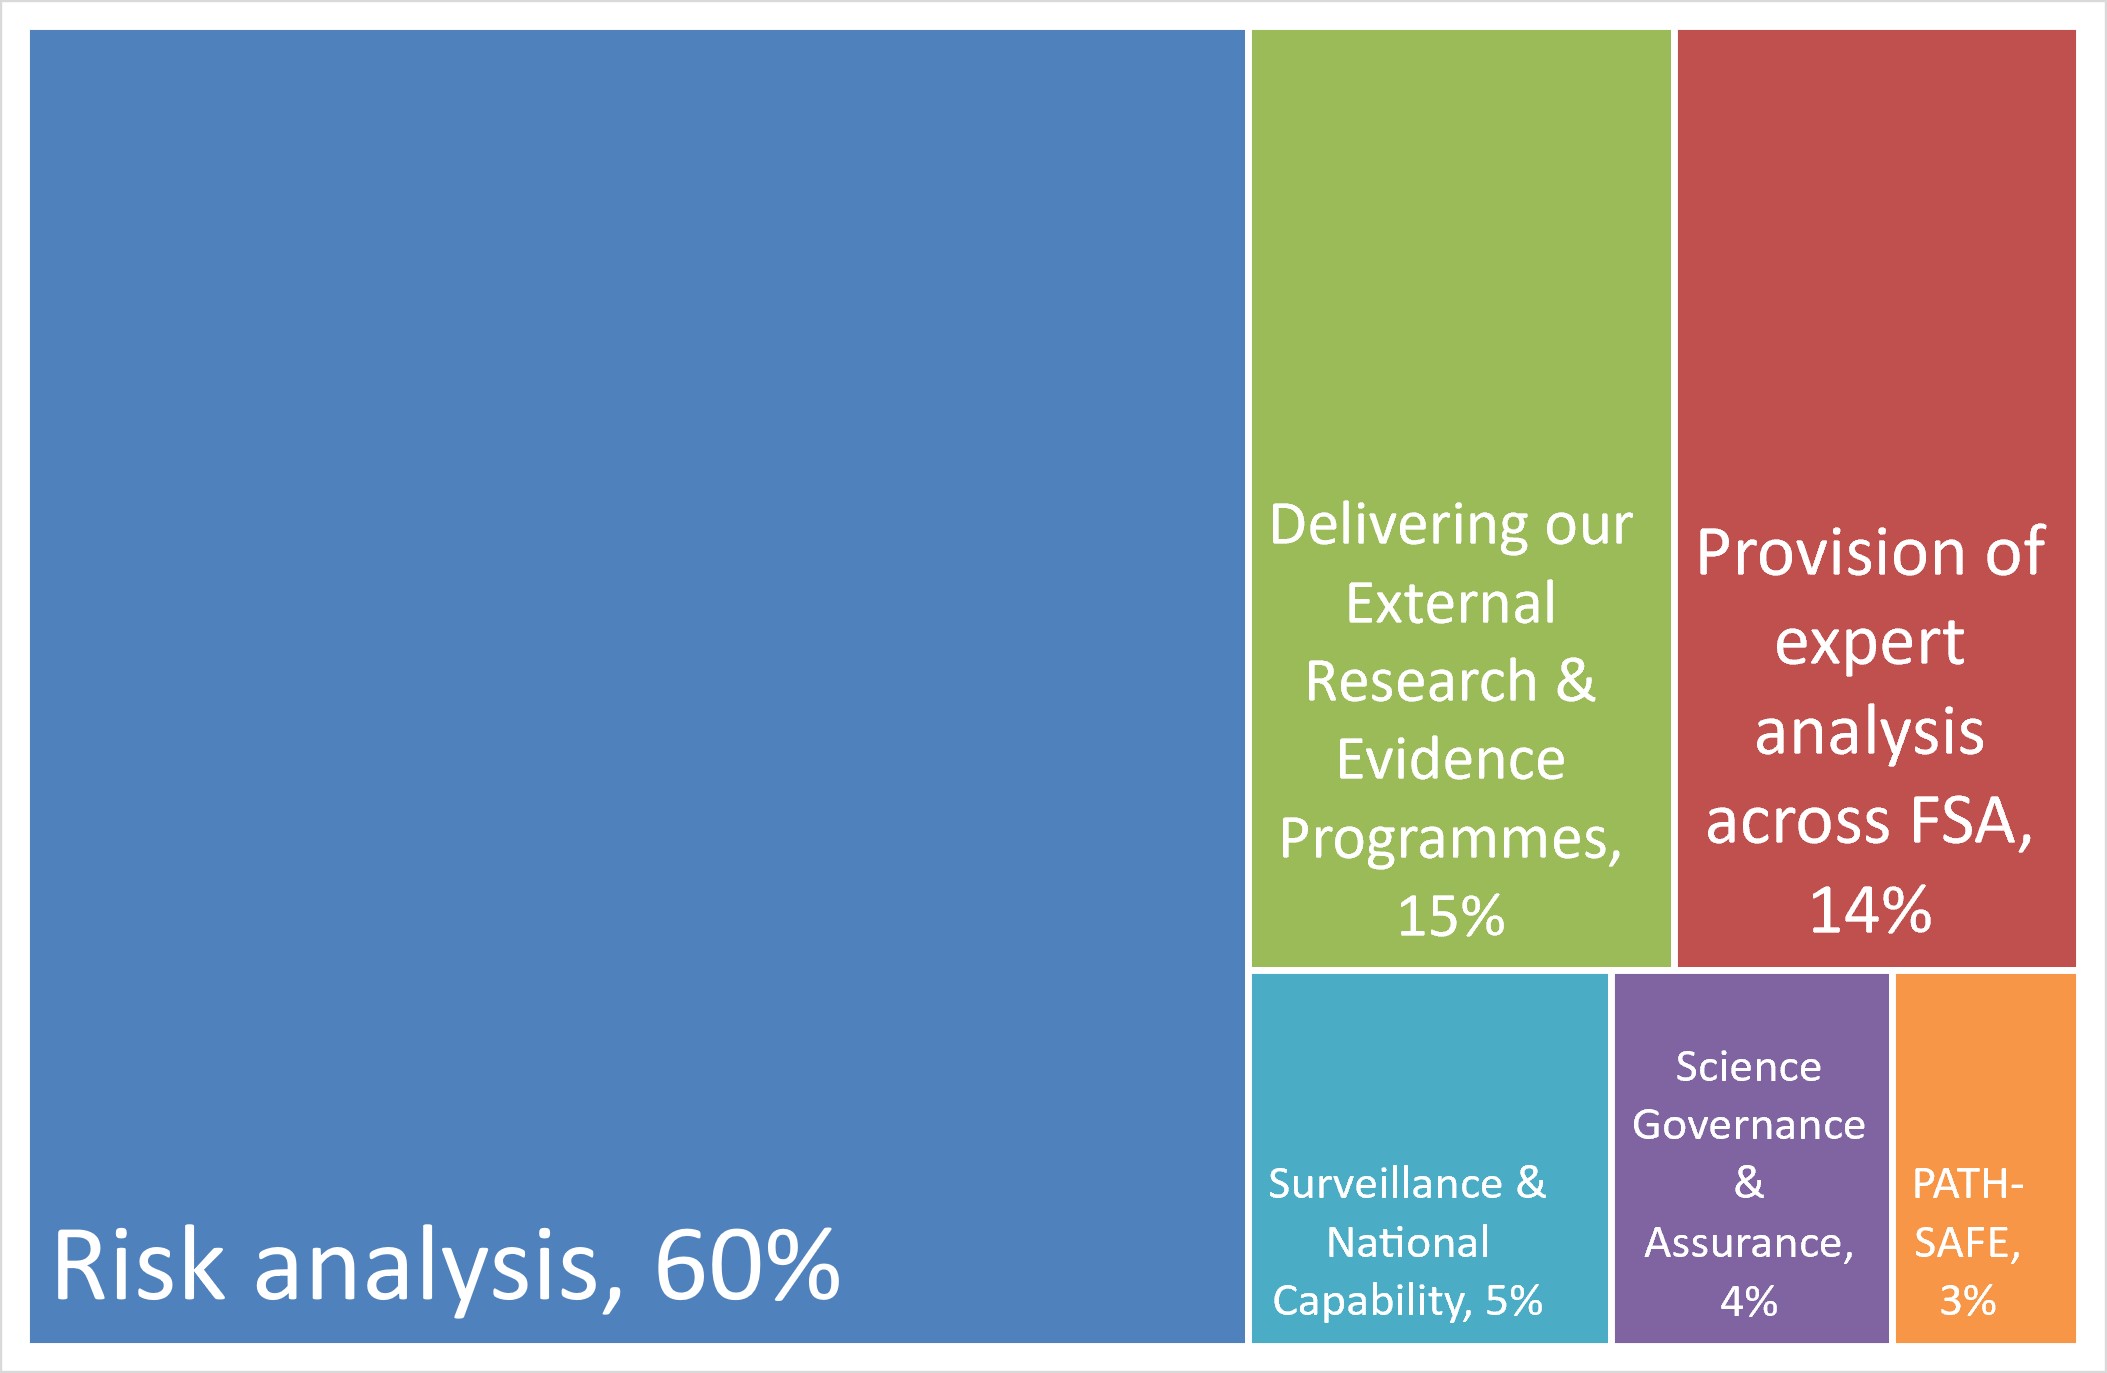 risk analysis 60%, delivering our external research and evidence programmes 15%, provision of expert analysis across FSA 14%.